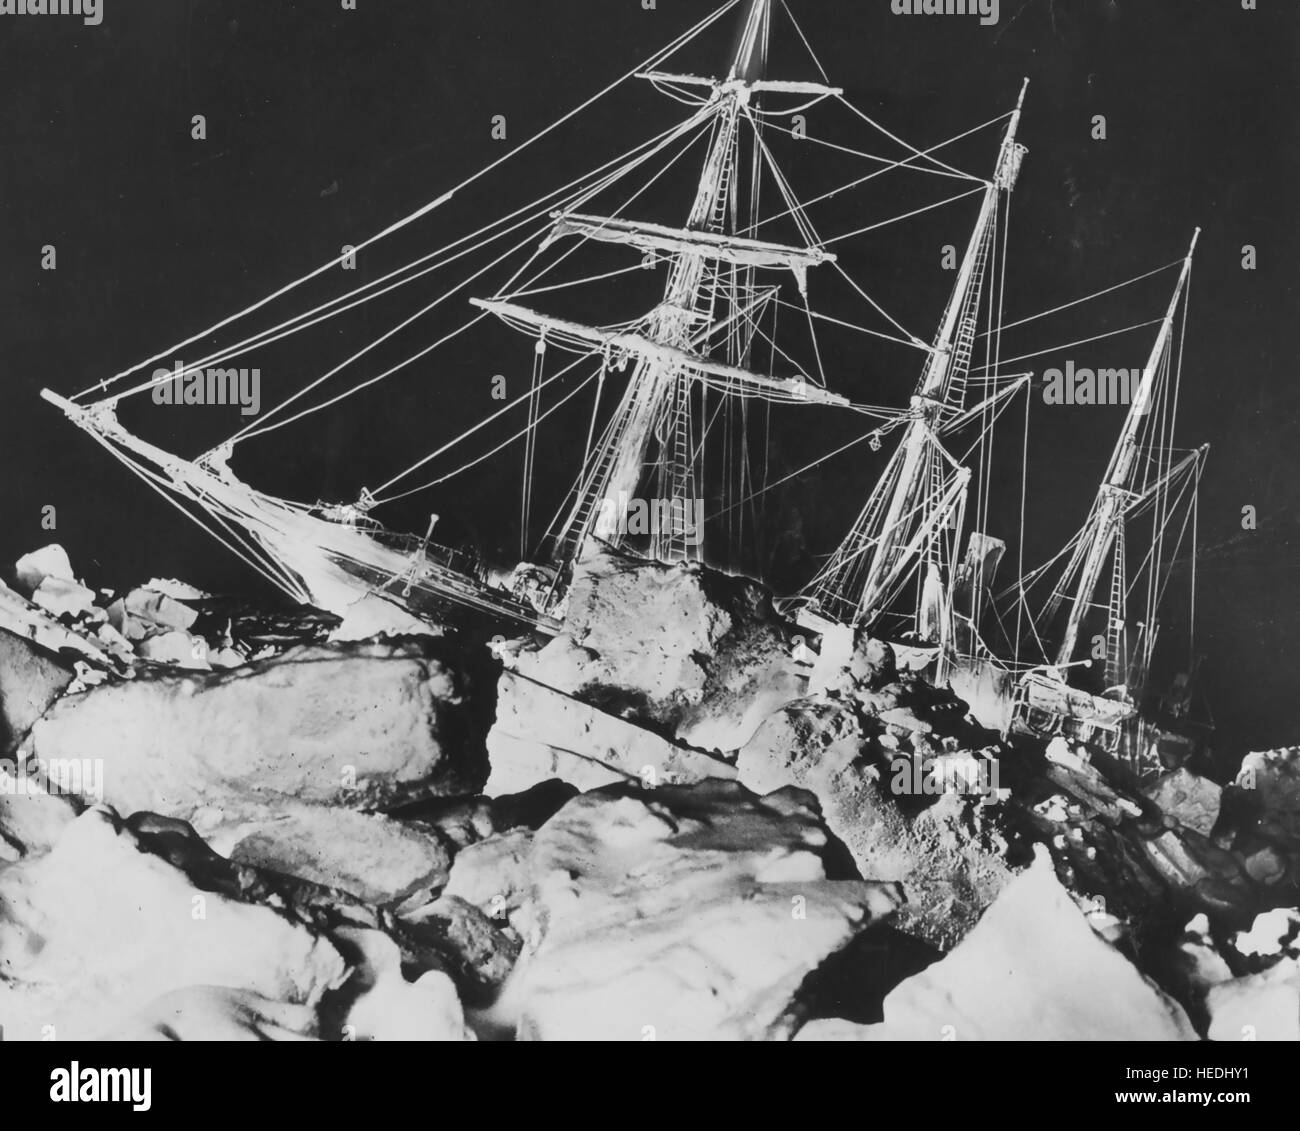 ENDURANCE trapped in pack ice in the Weddell Sea during the Imperial Trans-Antarctic Expedition of 1914. Photo: Frank Hurley Stock Photo